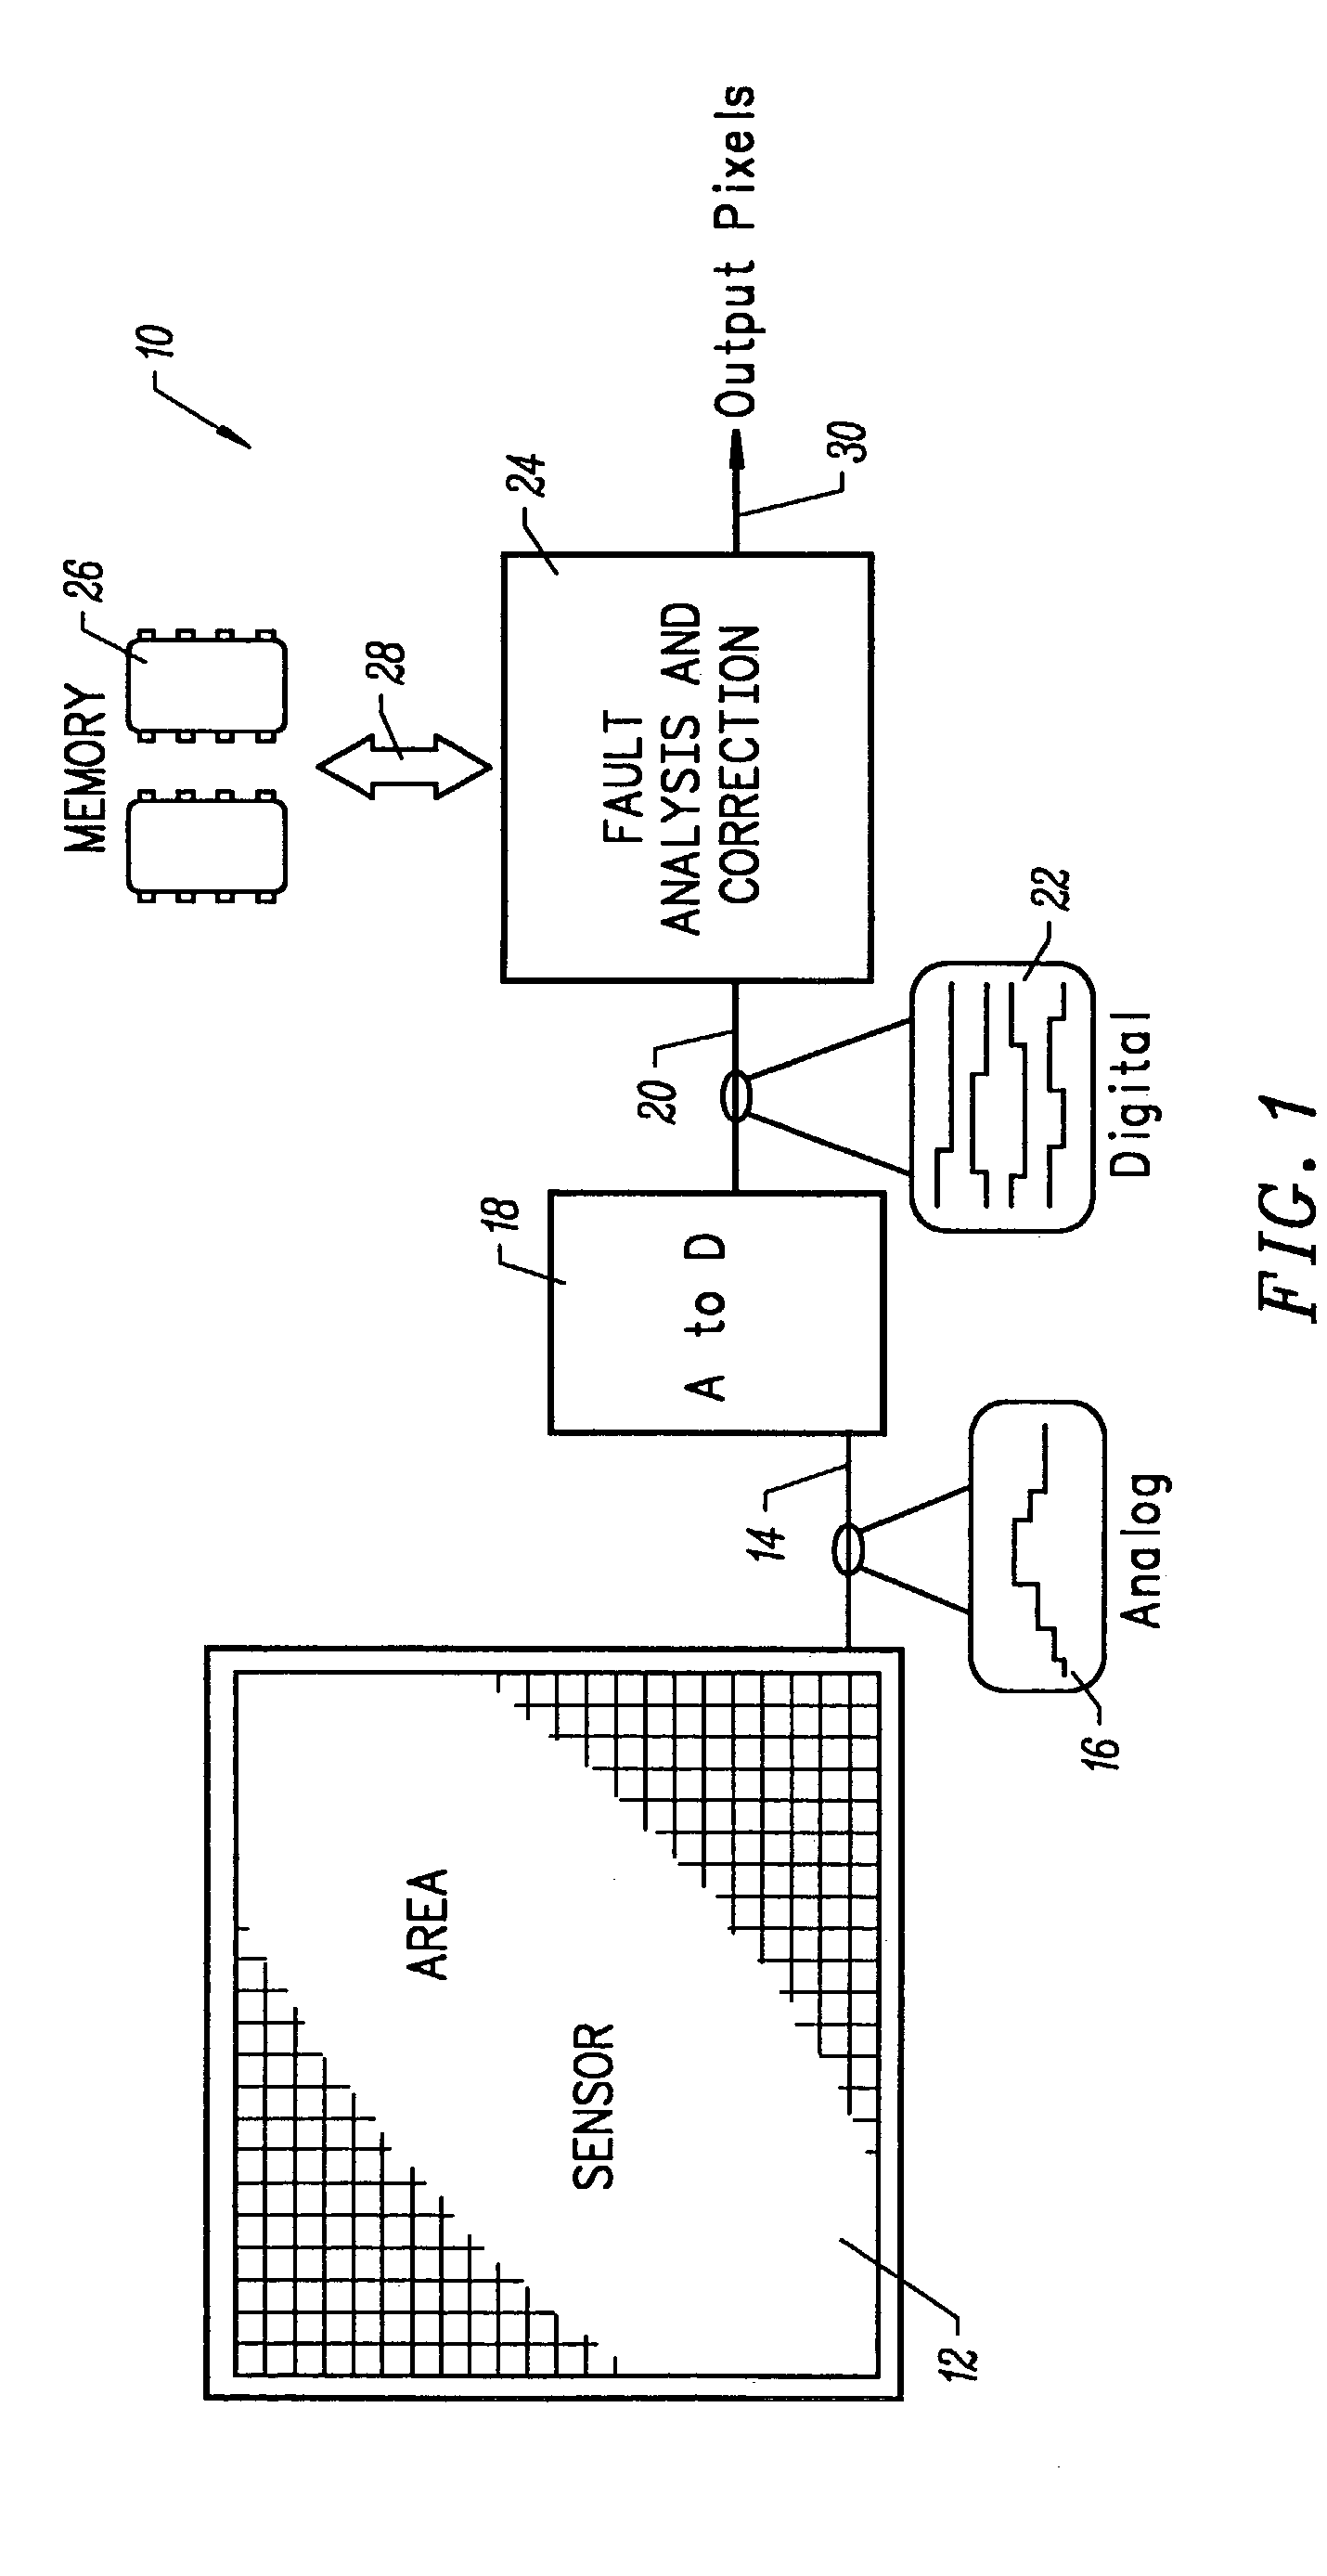 Pixel correction system and method for CMOS imagers